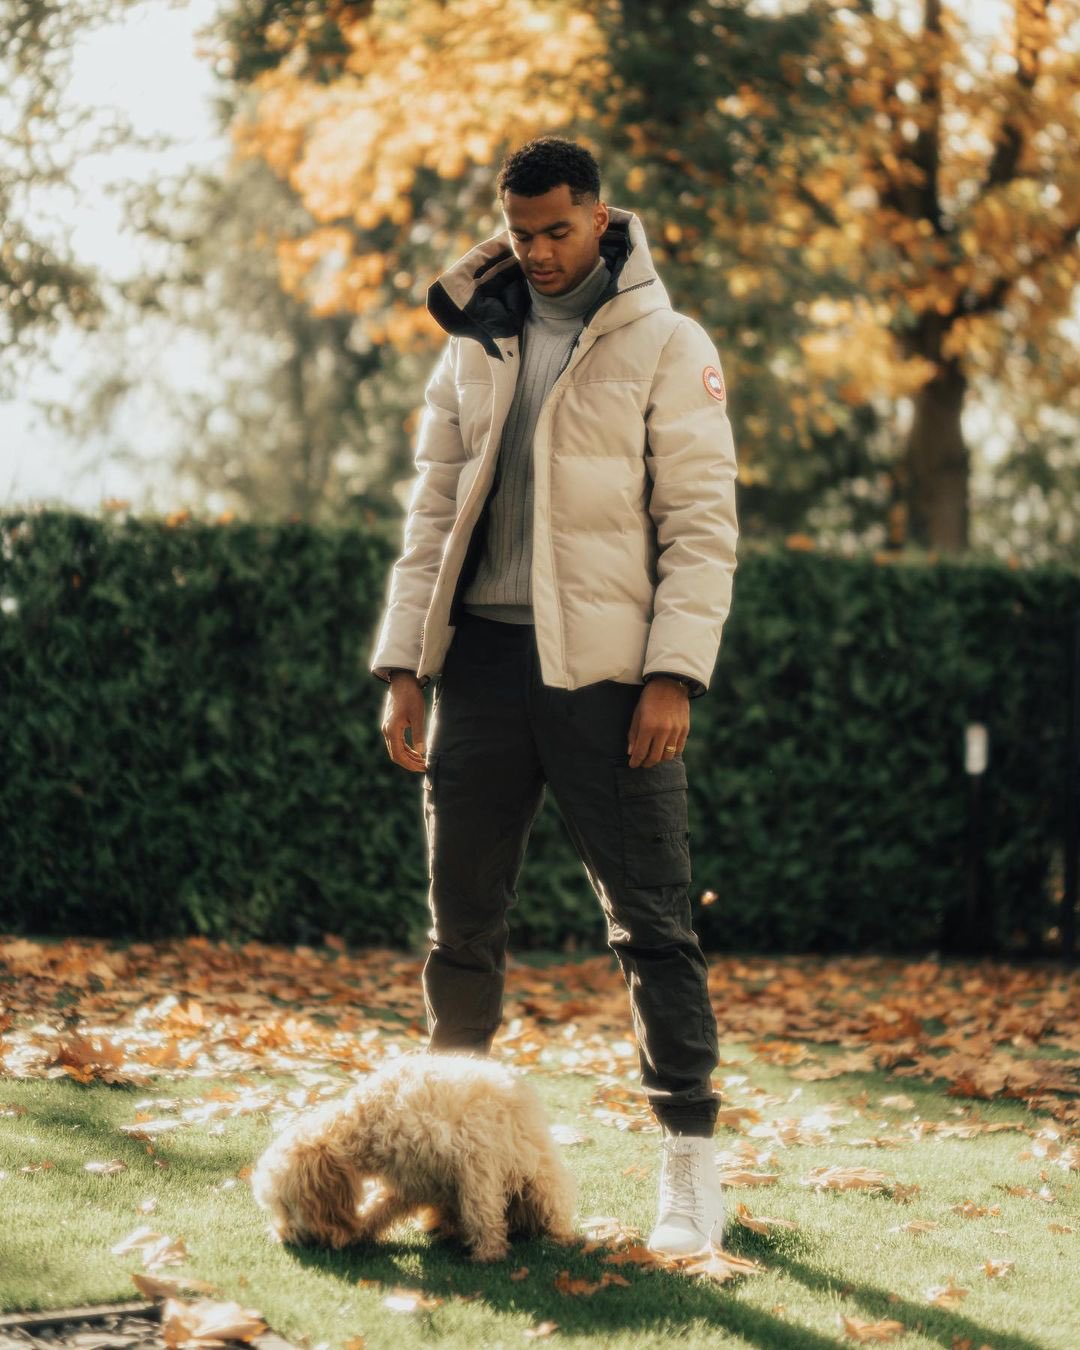 Footballers with animals on X: "Cody Gakpo admiring his dog https://t.co/3RTChZXkrq" / X